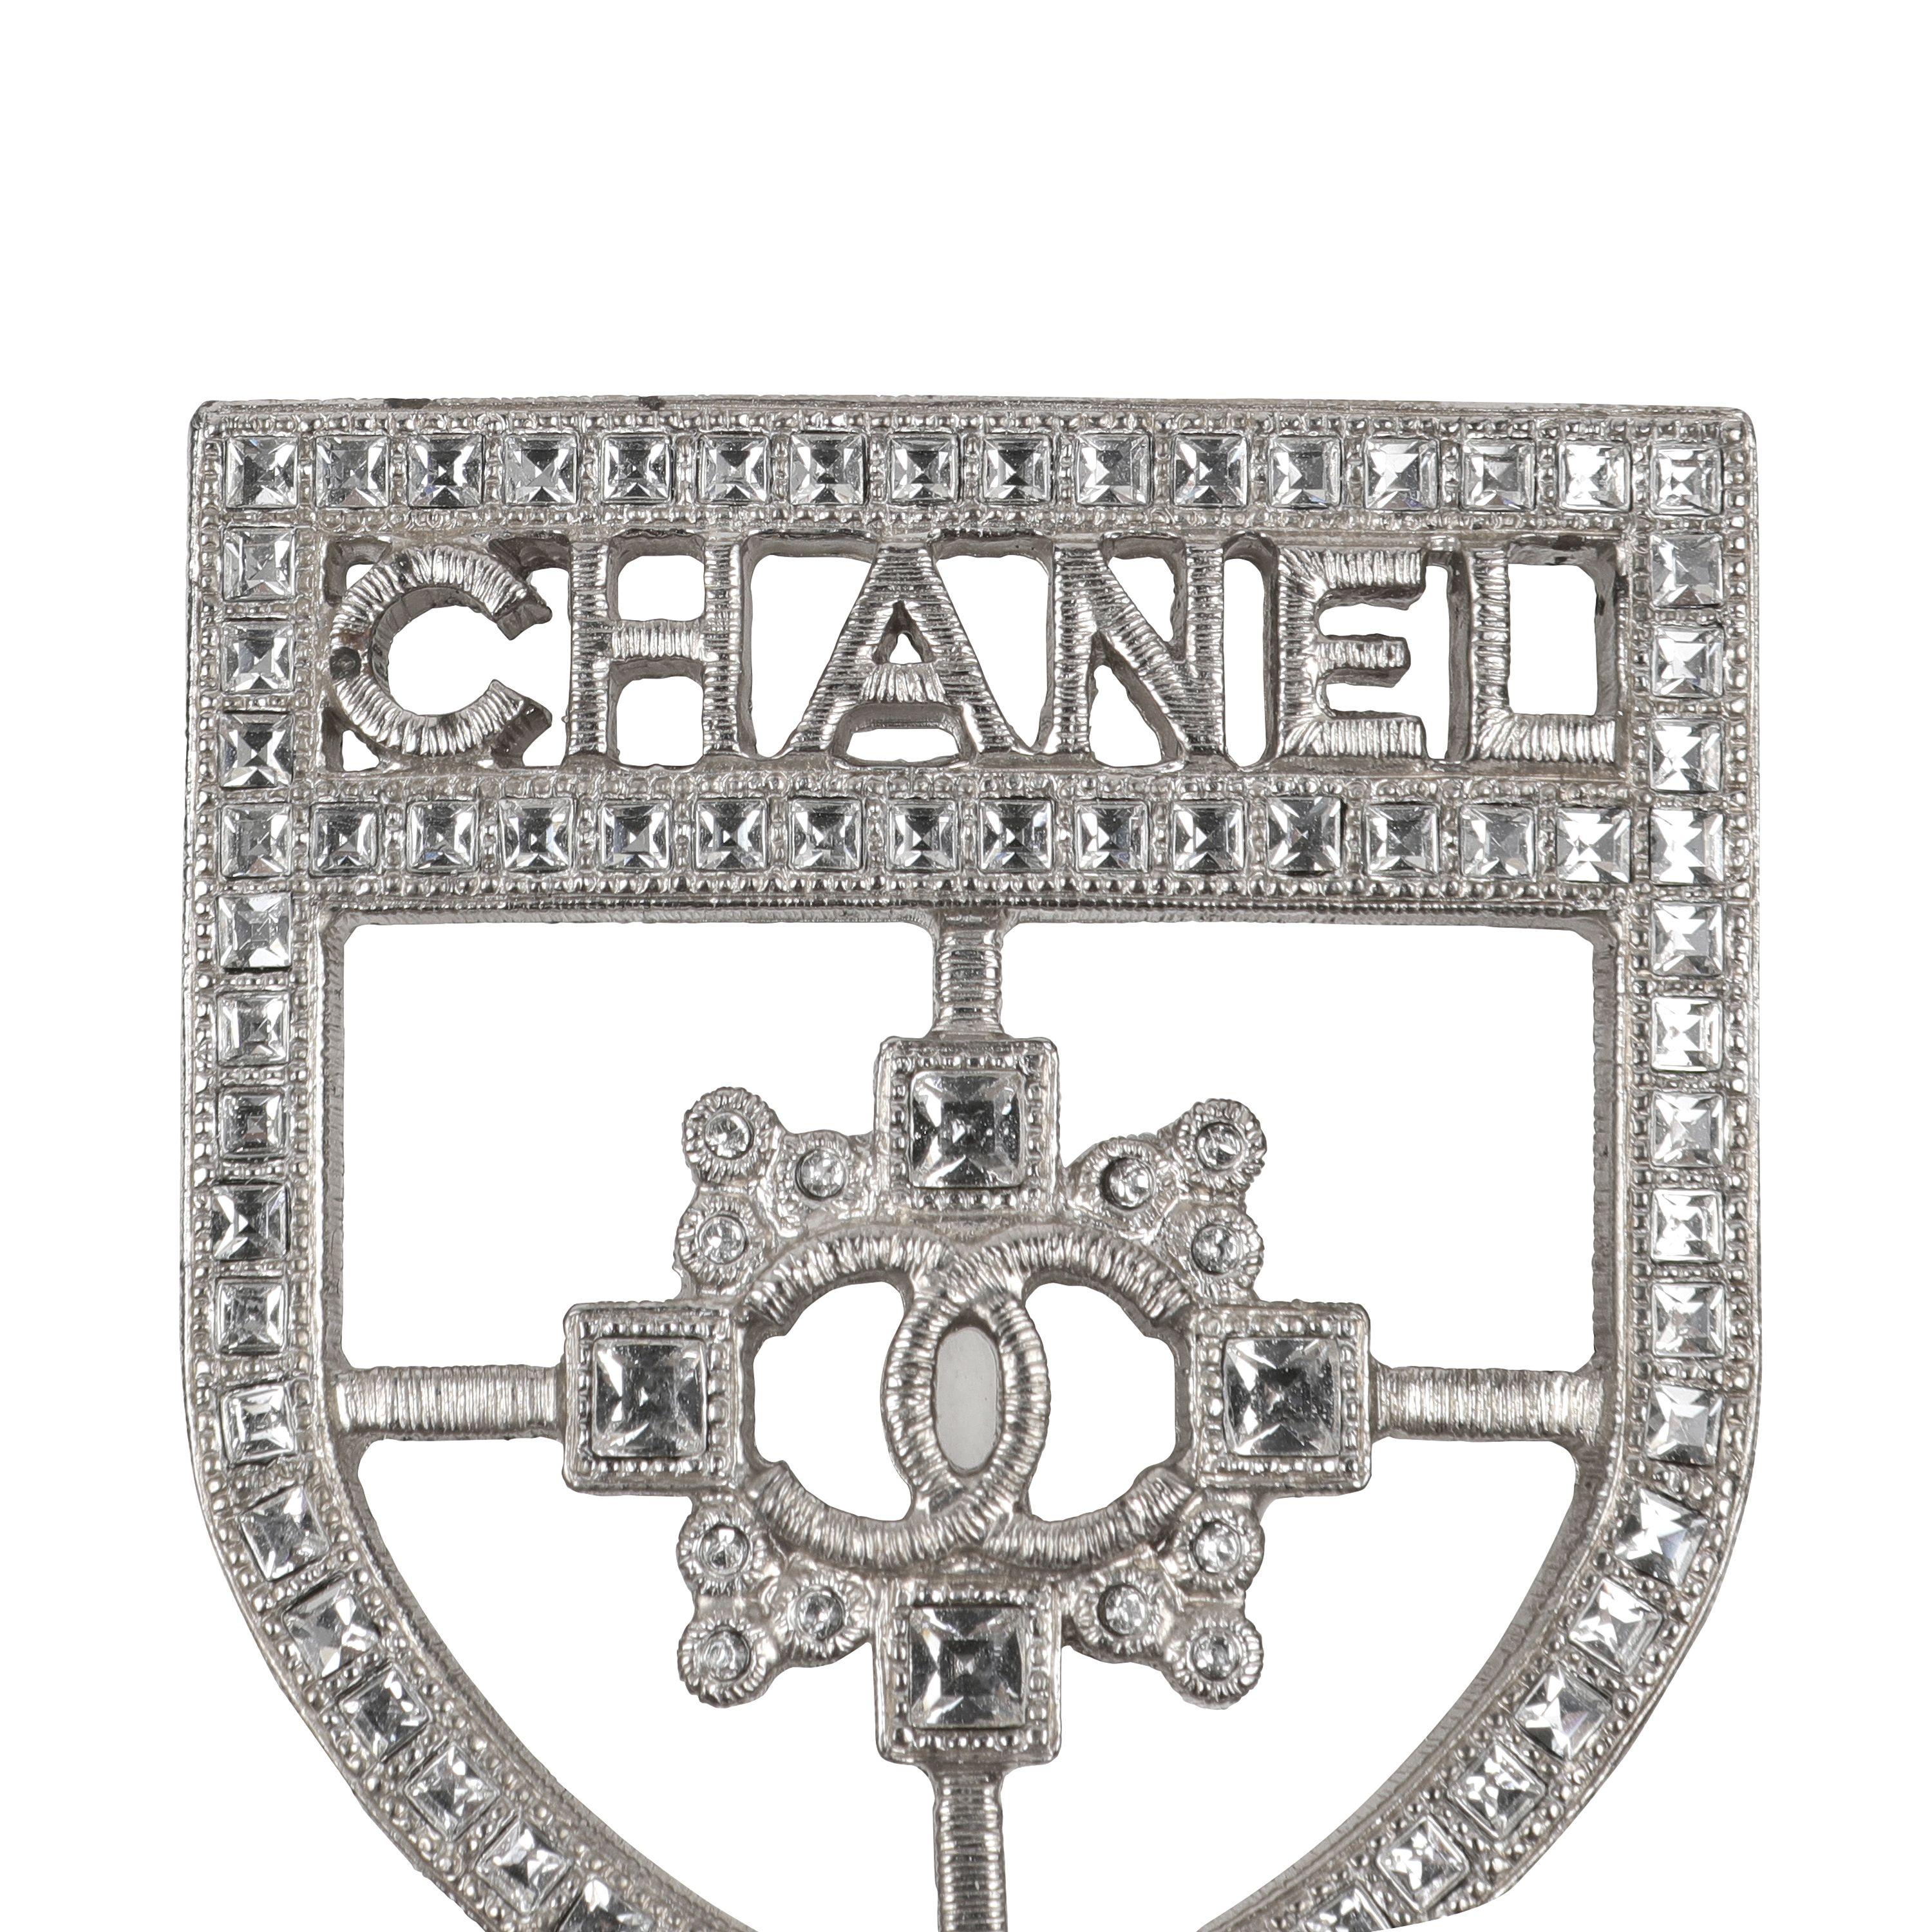 This authentic. Chanel Silver Crystal Crest Brooch is pristine.  Silver tone metal, clear crystal design. CC crest and CHANEL lettering.    Pouch or box included. 

PBF 13954
